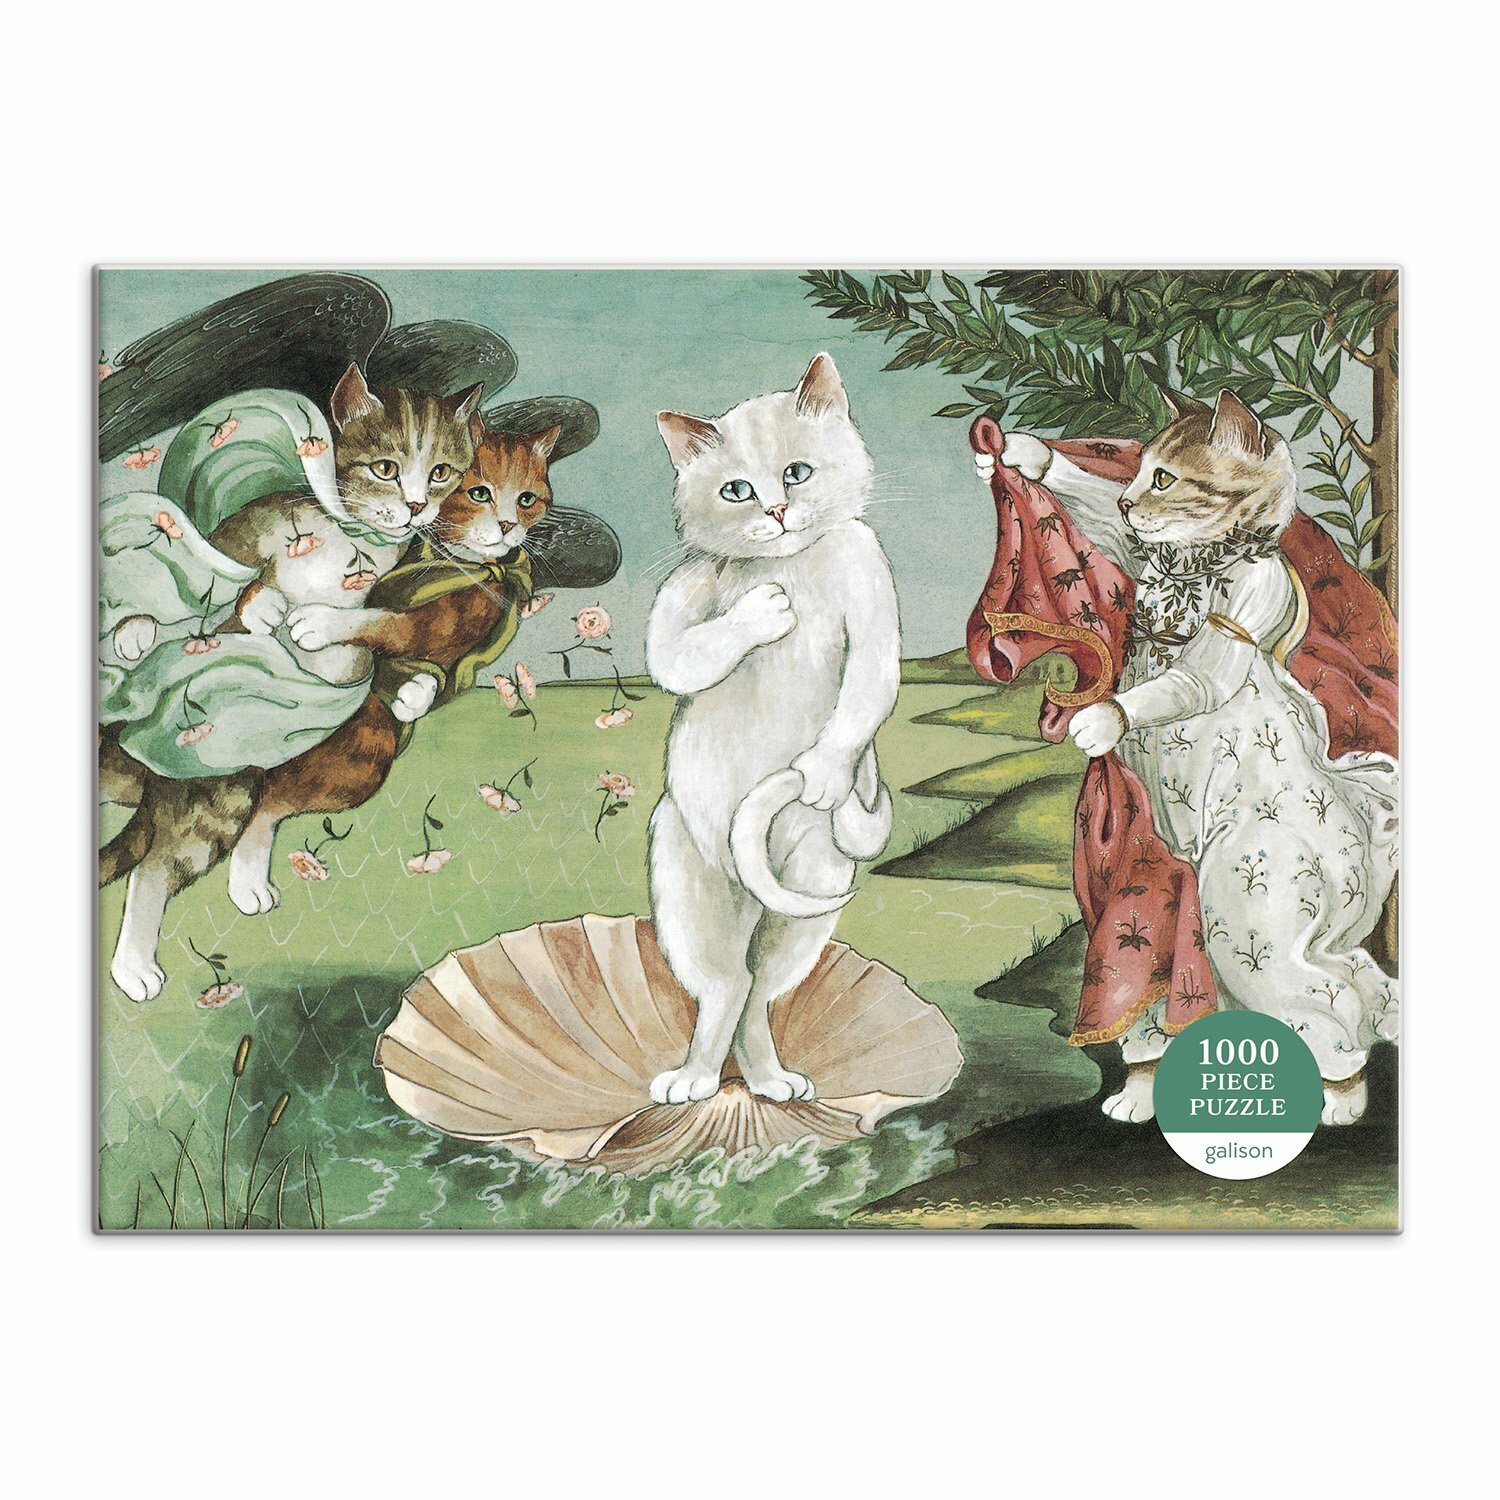 birth-of-venus-meowsterpiece-of-western-art-1000-piece-puzzle-1000-piece-puzzles-meowsterpiece-of-western-collection-299275_2400x.jpg